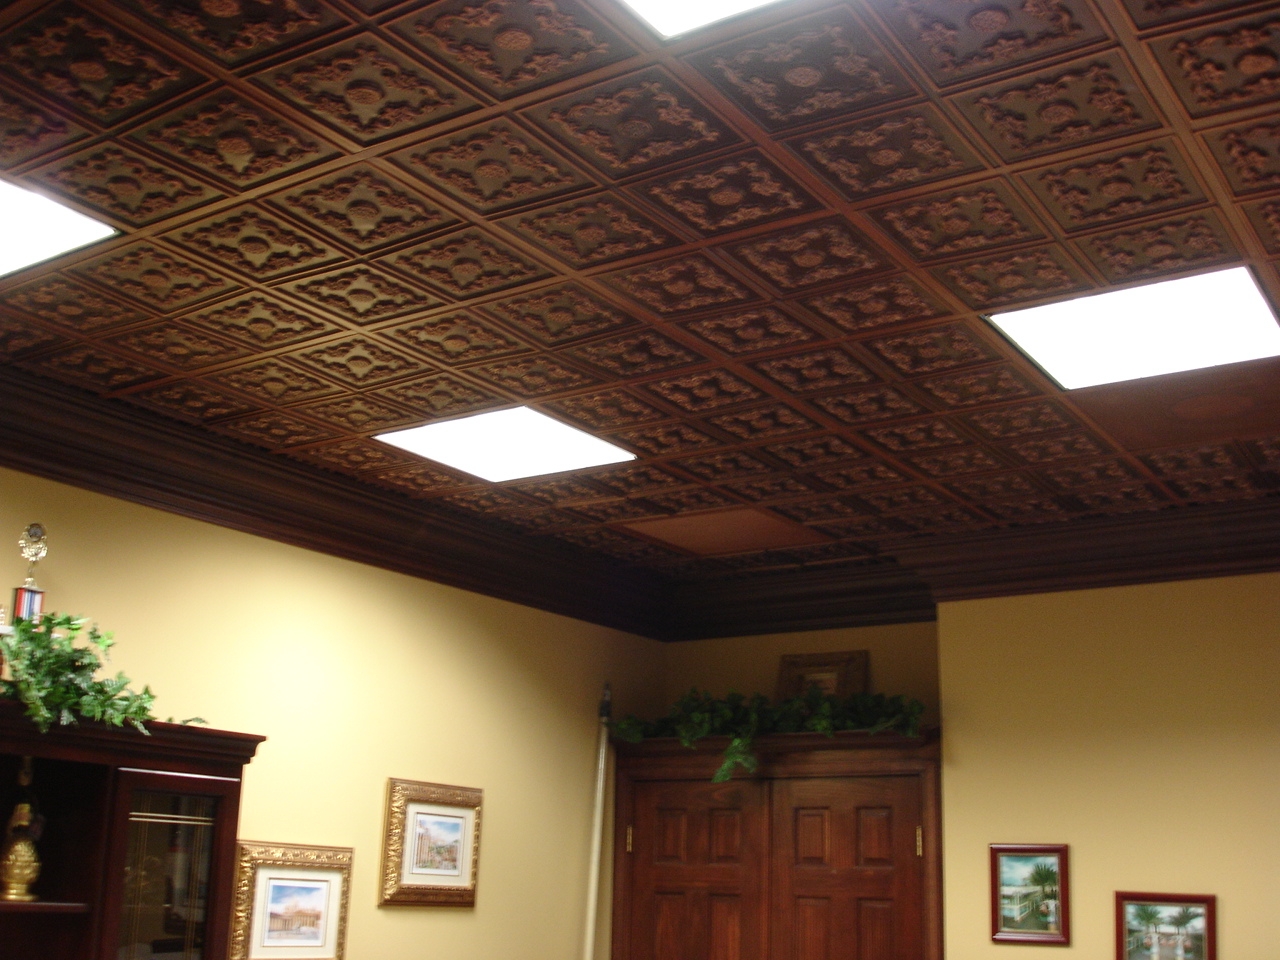 Ceiling Tiles Drop Ceiling Panels Ceiling Tiles Drop Ceiling Panels engaging decorated drop ceiling tiles with faux tin copper ones to 1280 X 960